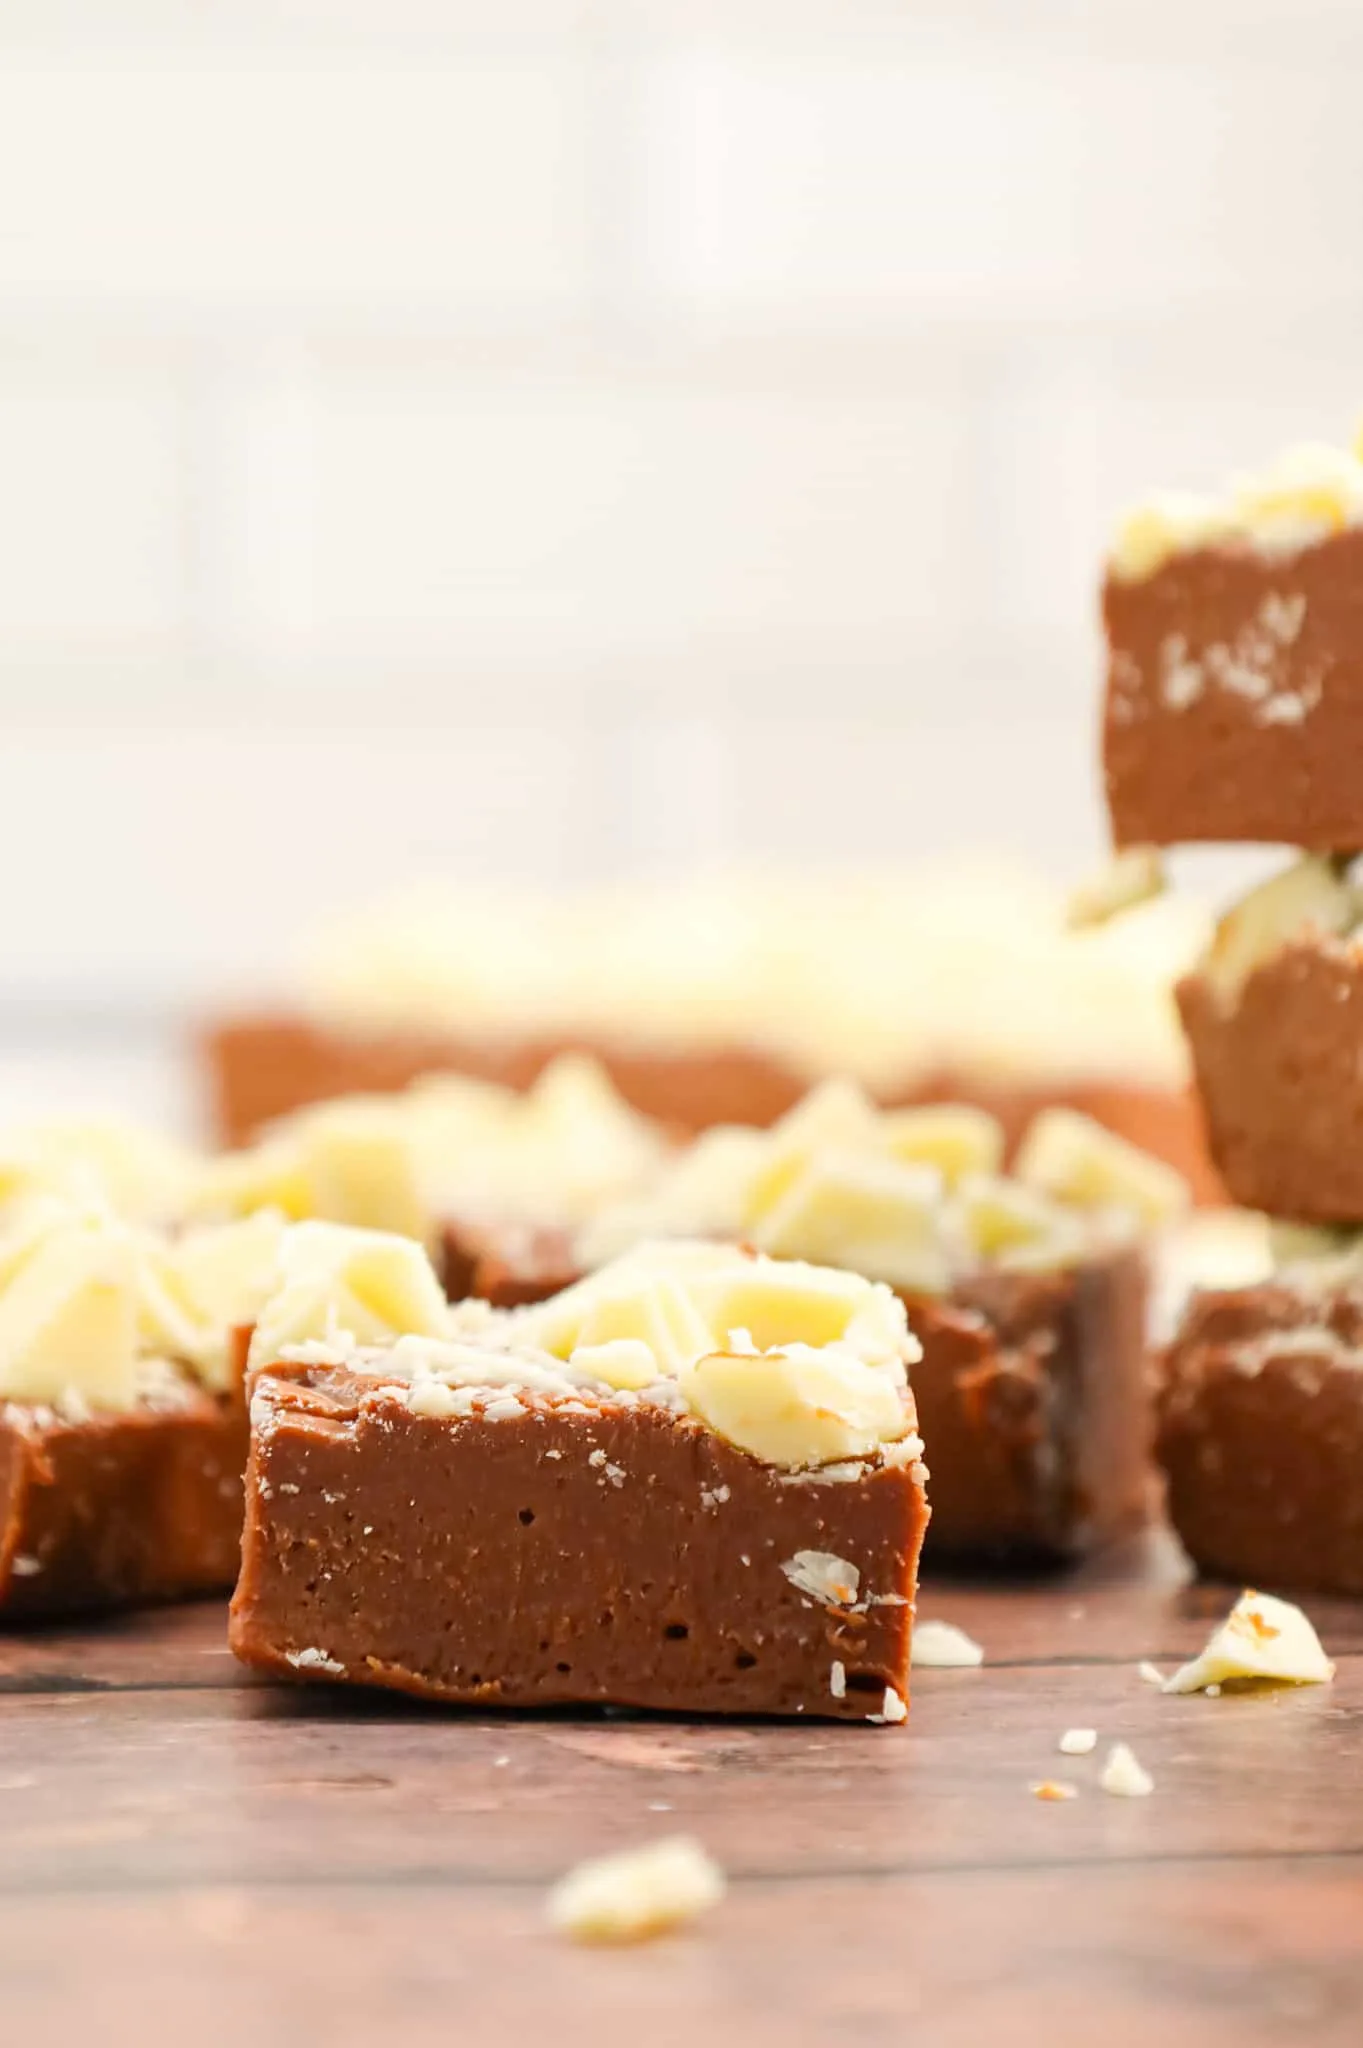 Bailey's Fudge is an easy chocolate fudge recipe made with milk chocolate chips, sweetened condensed milk and Bailey's Irish cream and topped with chopped white chocolate.